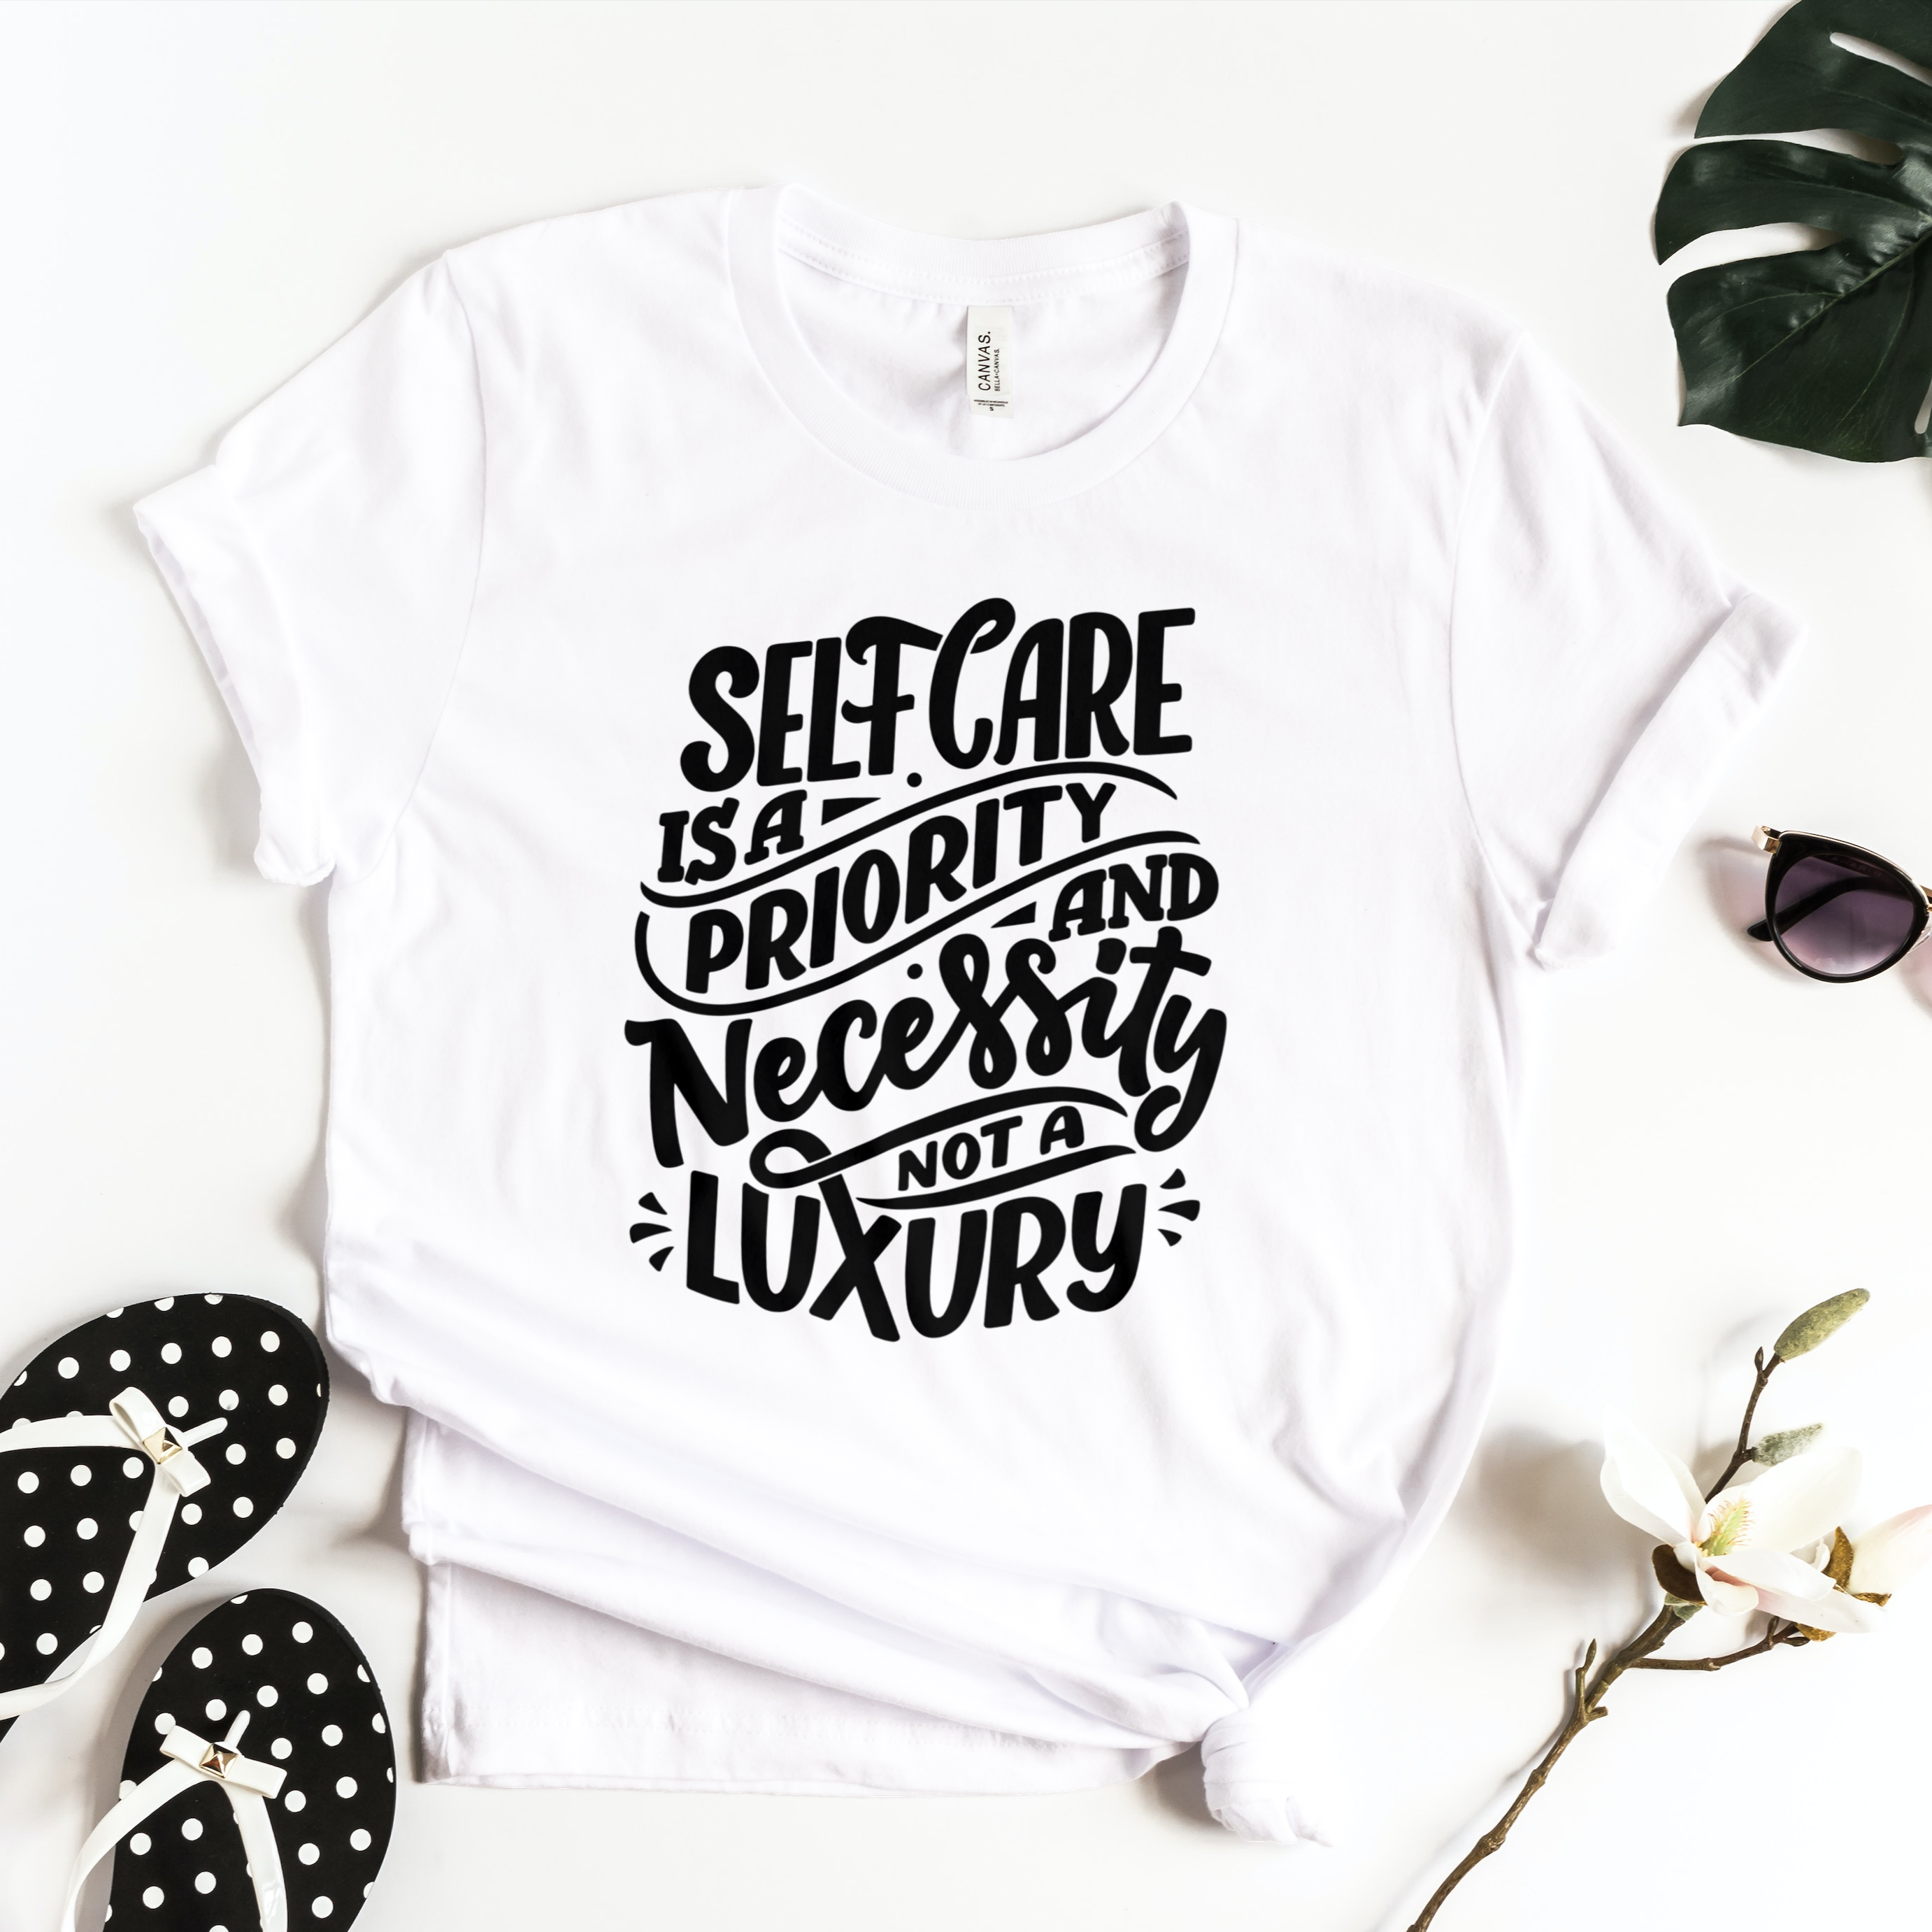 Story of Awakening Lifestyle Community Spirituality Relationships Love Light Meditation Oneness Earth Balance Healing Shop Store Charity Tree Nature Read Write T shirt Tops Tees Clothing Women Horoscope Organic Cotton Self Care Is A Priority Quote